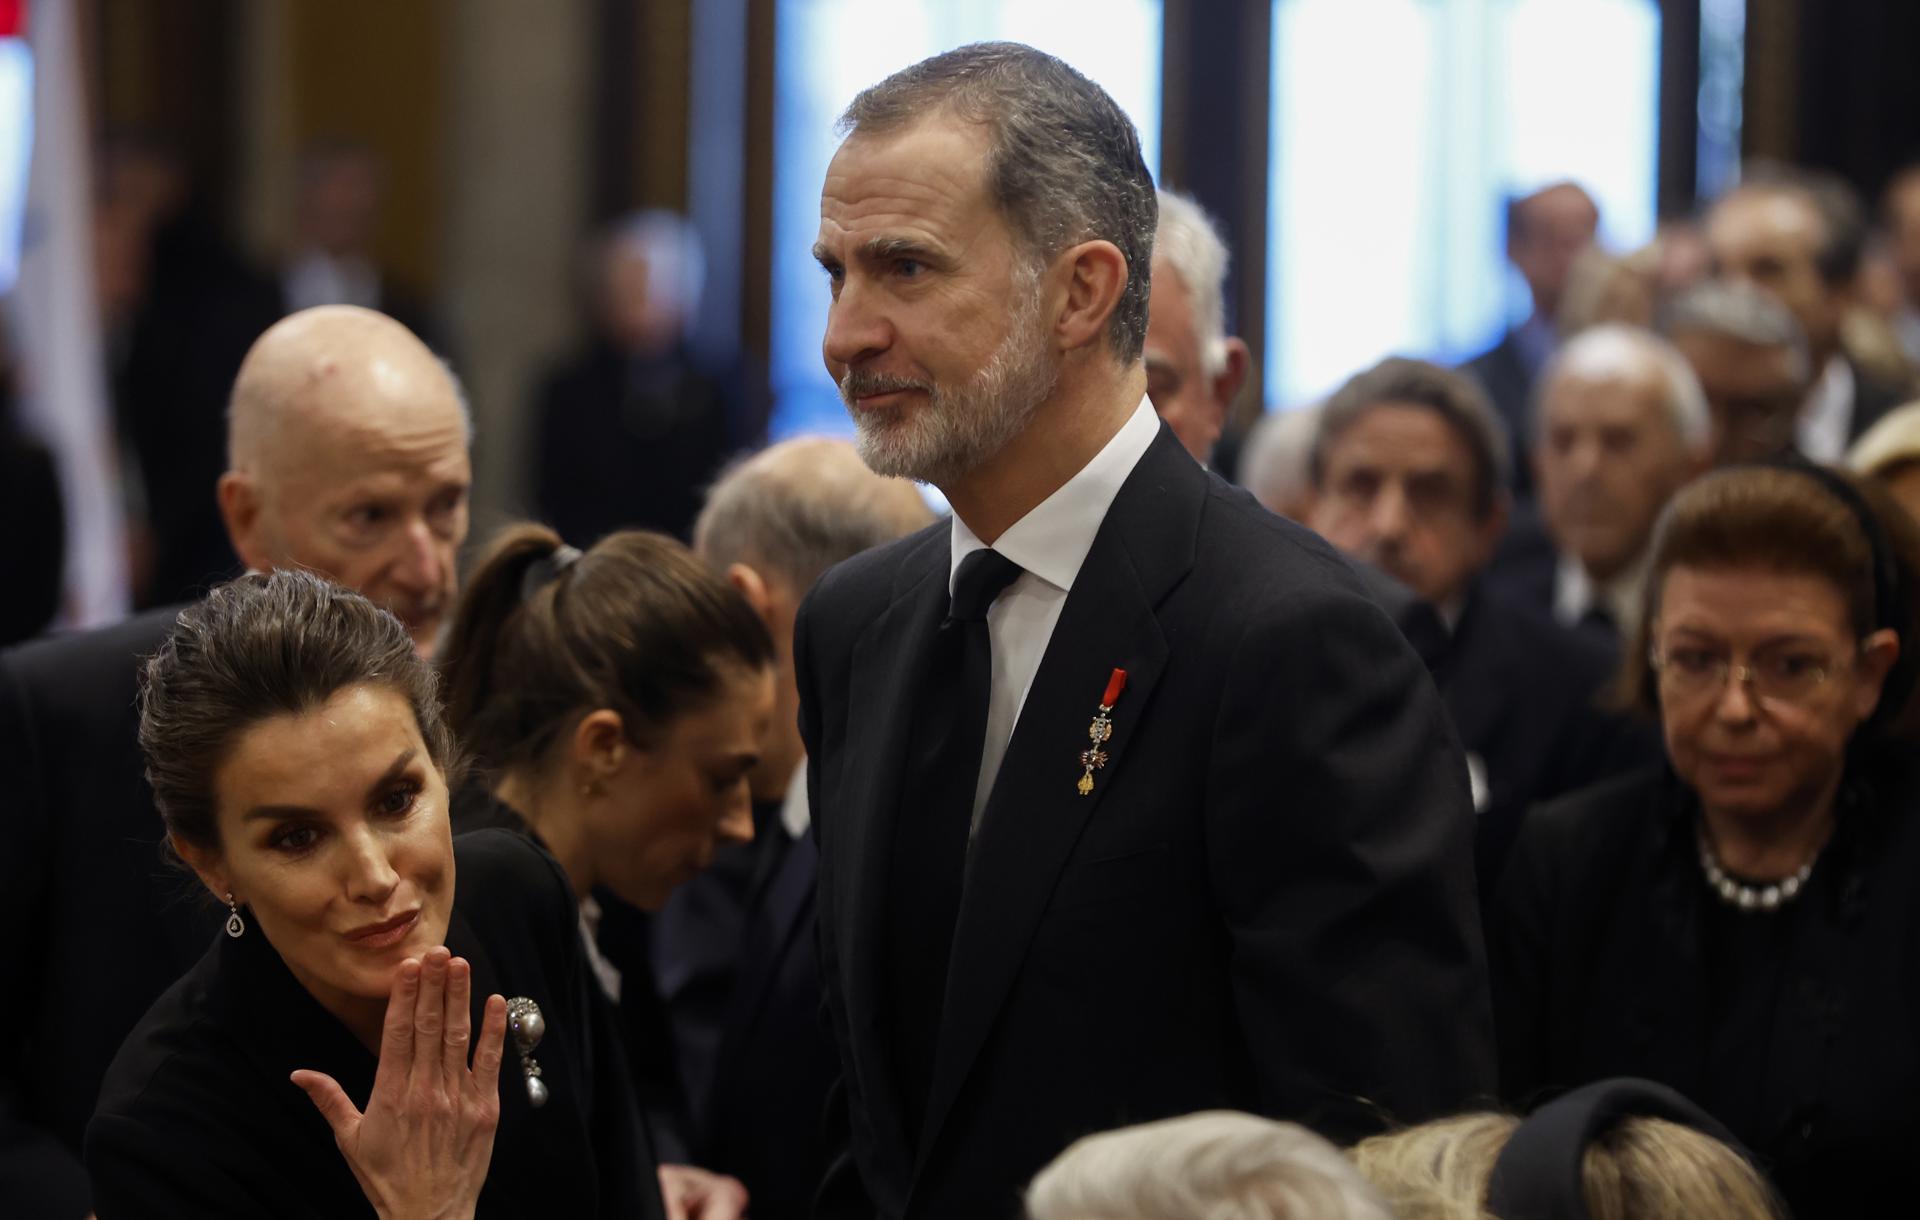 Felipe VI avoids photo with father Juan Carlos I at funeral for Constantine of Greece